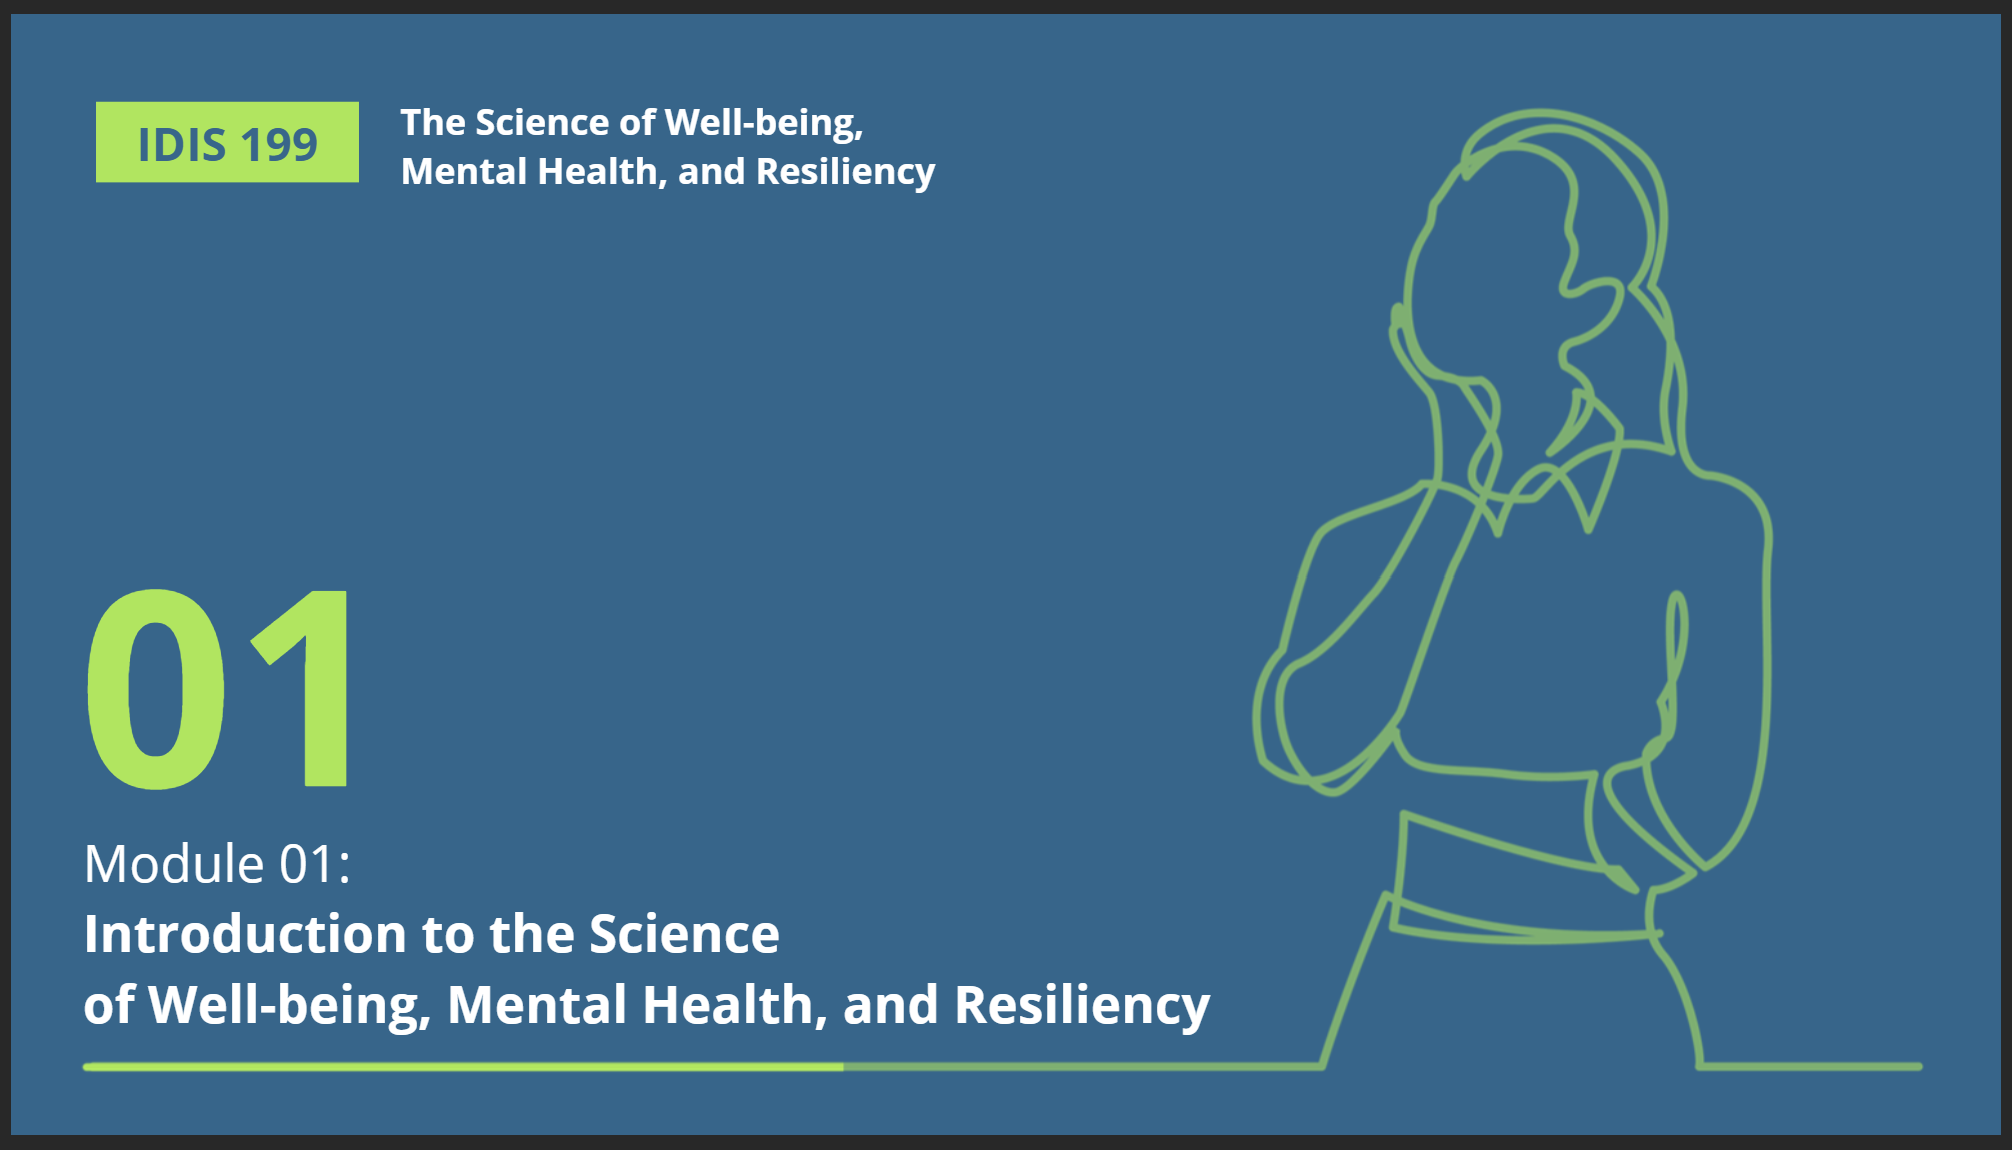 IDIS 199 The Science of Well-being, Mental Health, and Resiliency